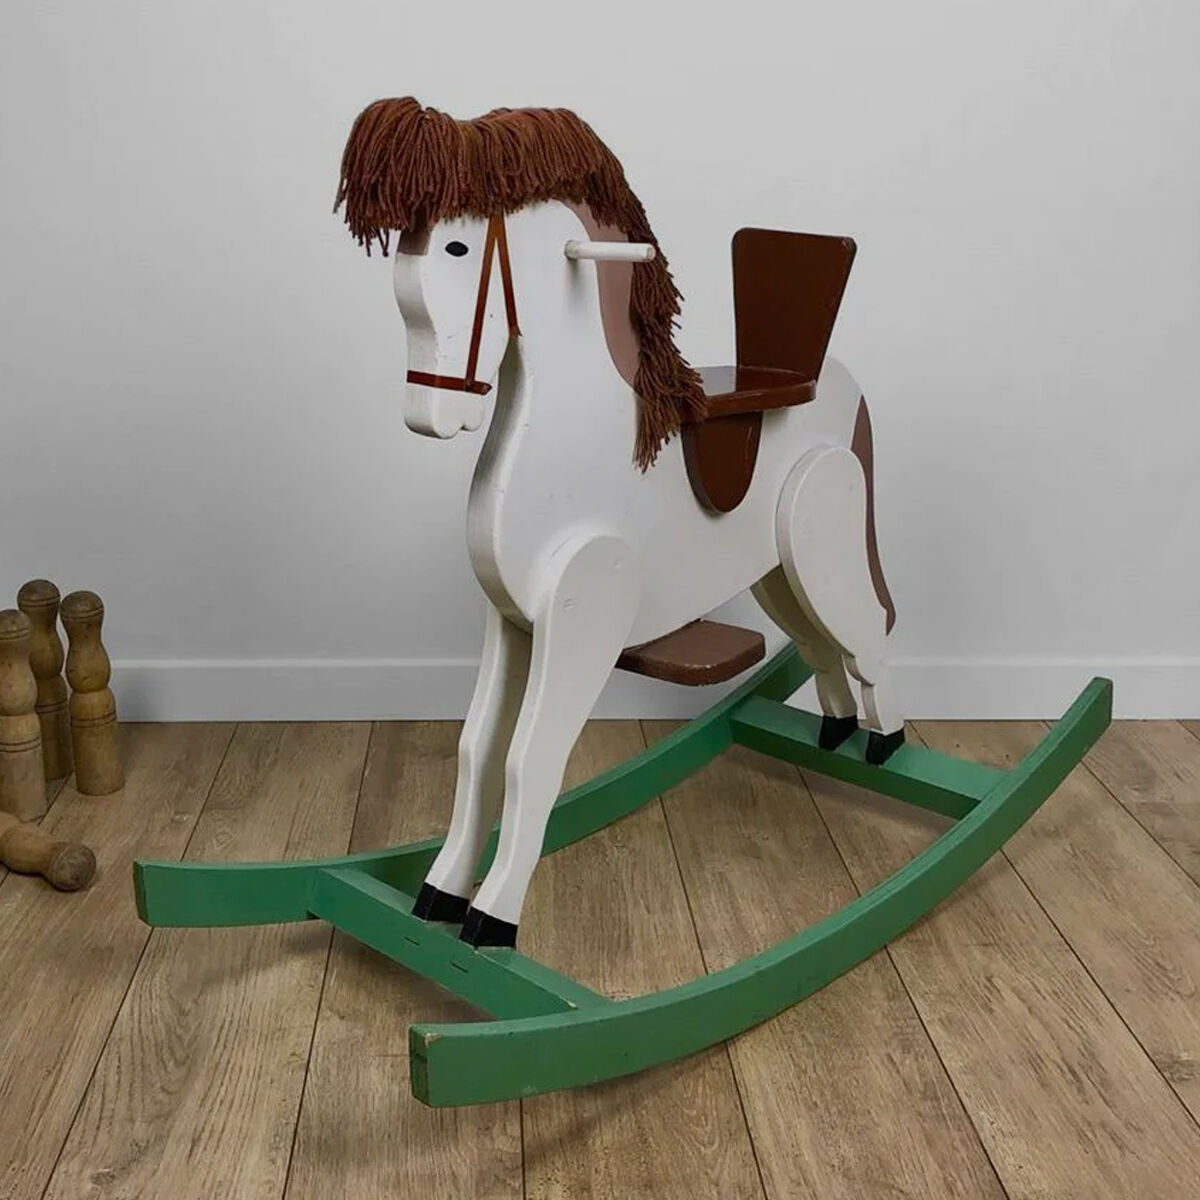 OVER HERE FOR ROCKING HORSES FOR LESS THAN 100€